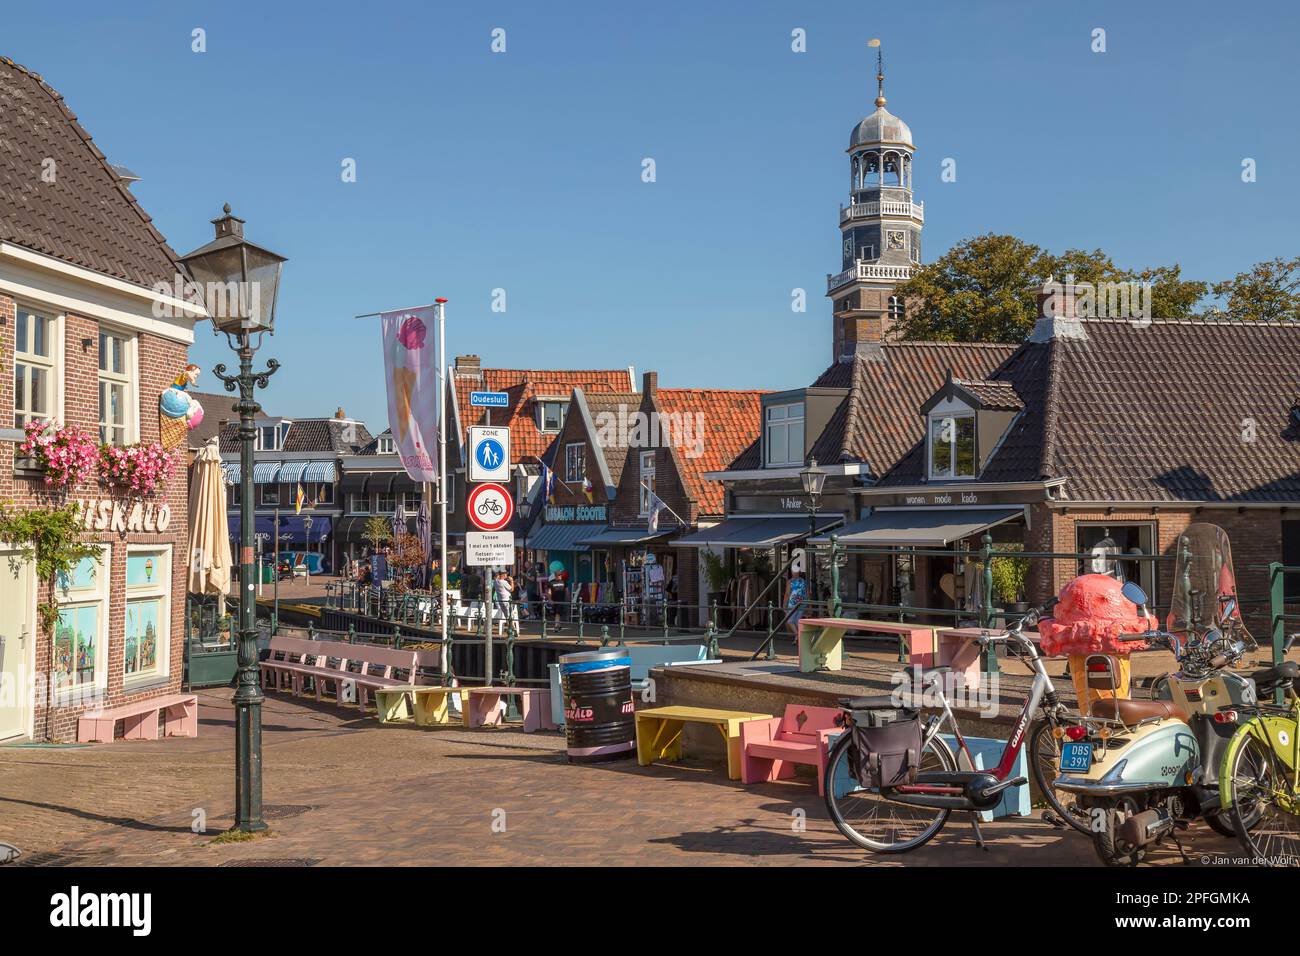 Center of the cozy picturesque fishing village of Lemmer in the province of Friesland. Stock Photo